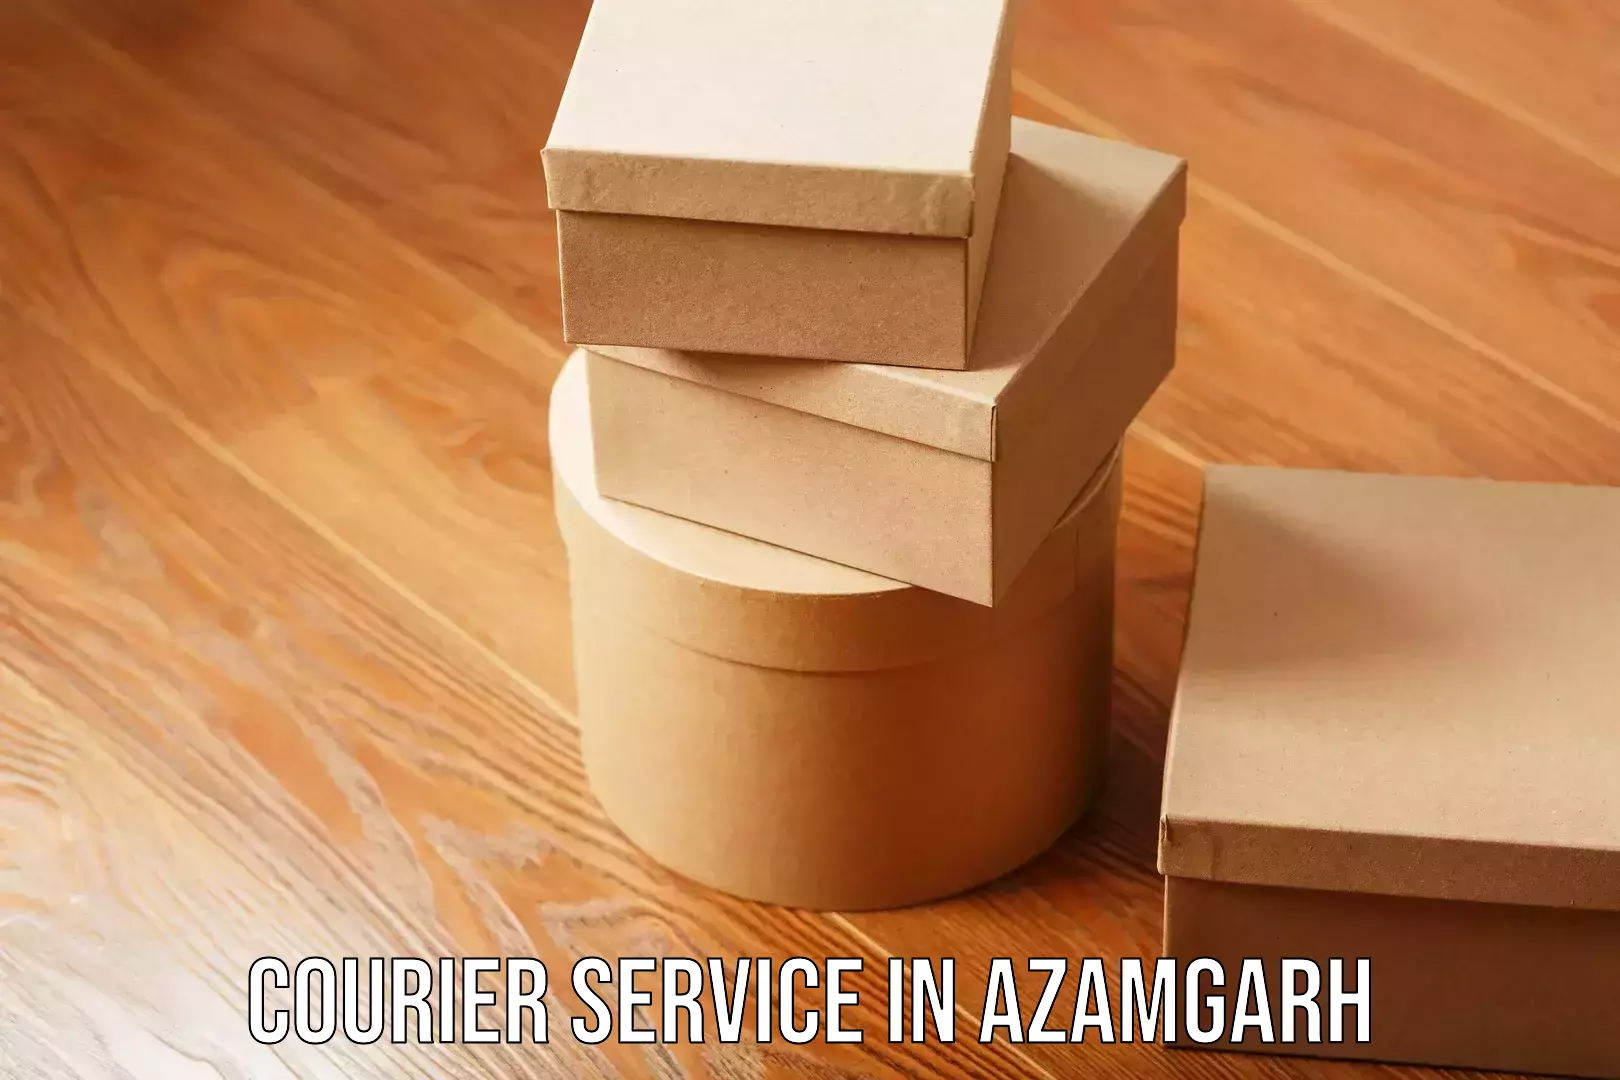 Customer-focused courier in Azamgarh